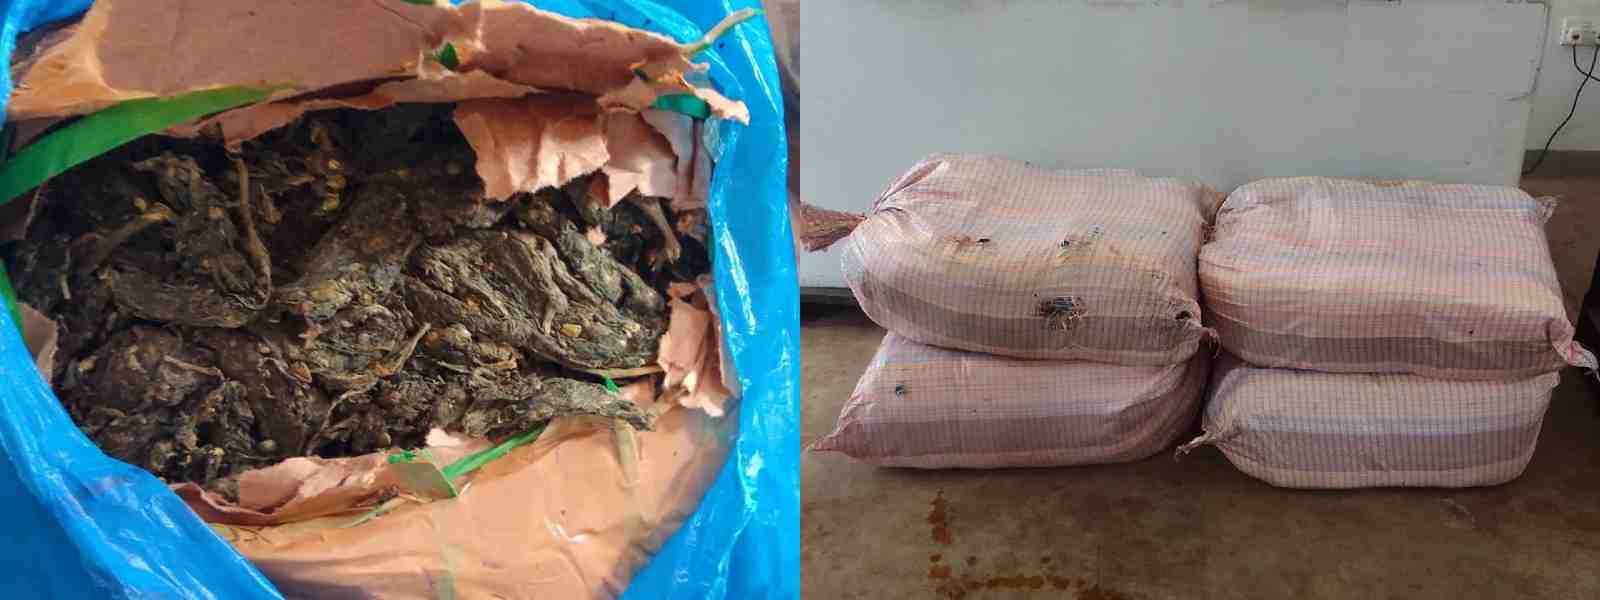 Rs. 42 Mn worth of Kerala Cannabis recovered adrift at sea